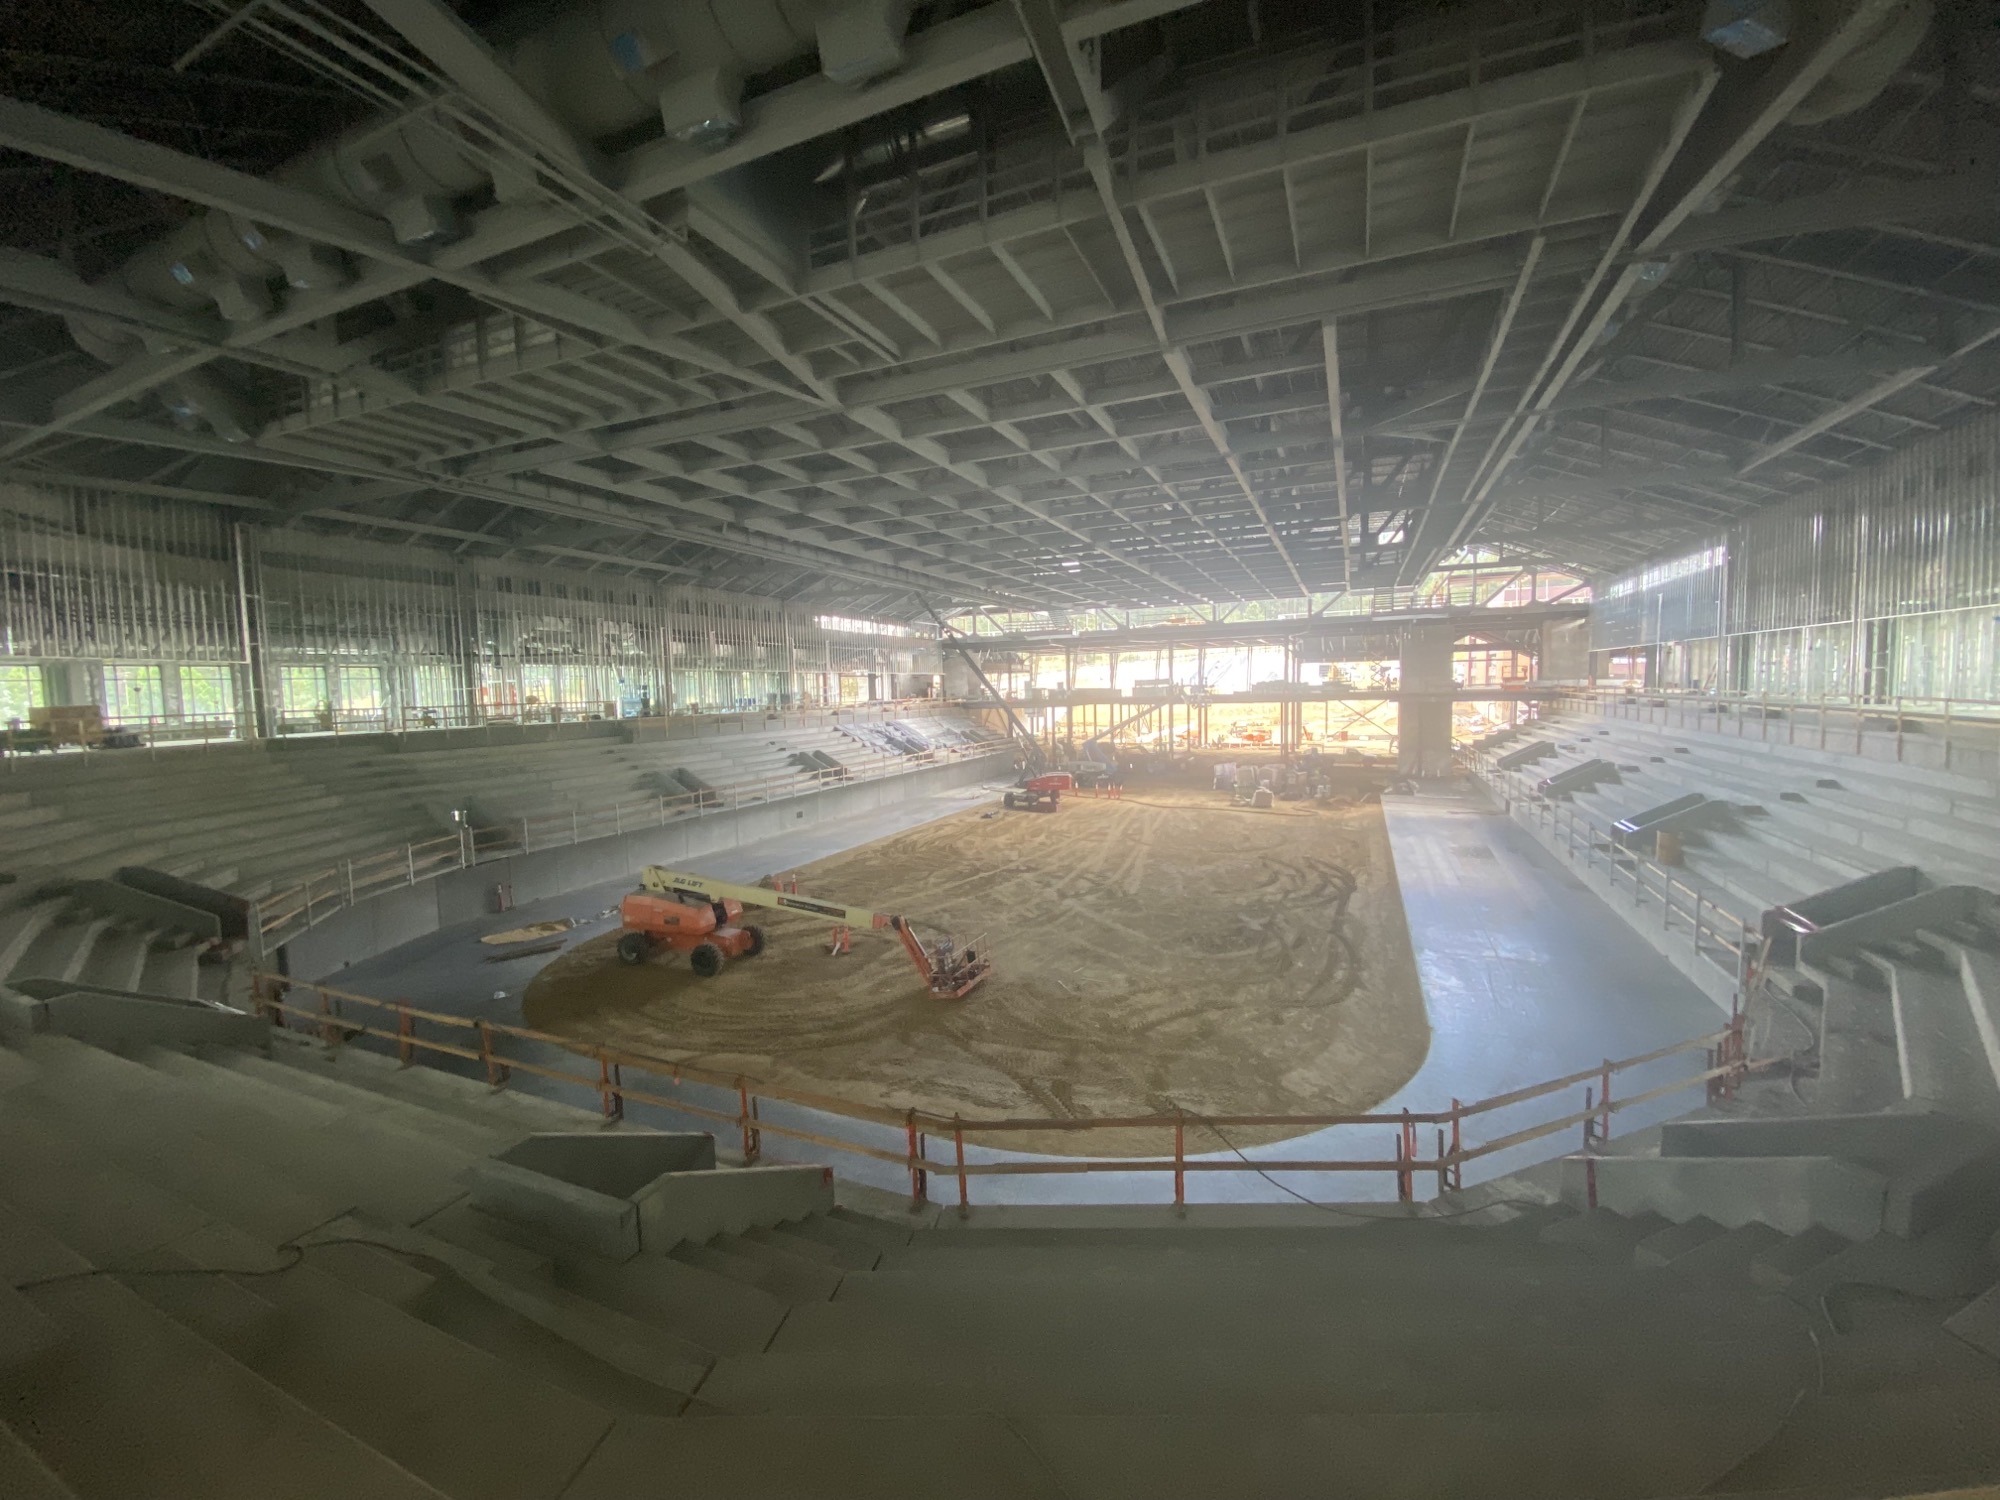 View of main floor at the Tahoe South Event Center.